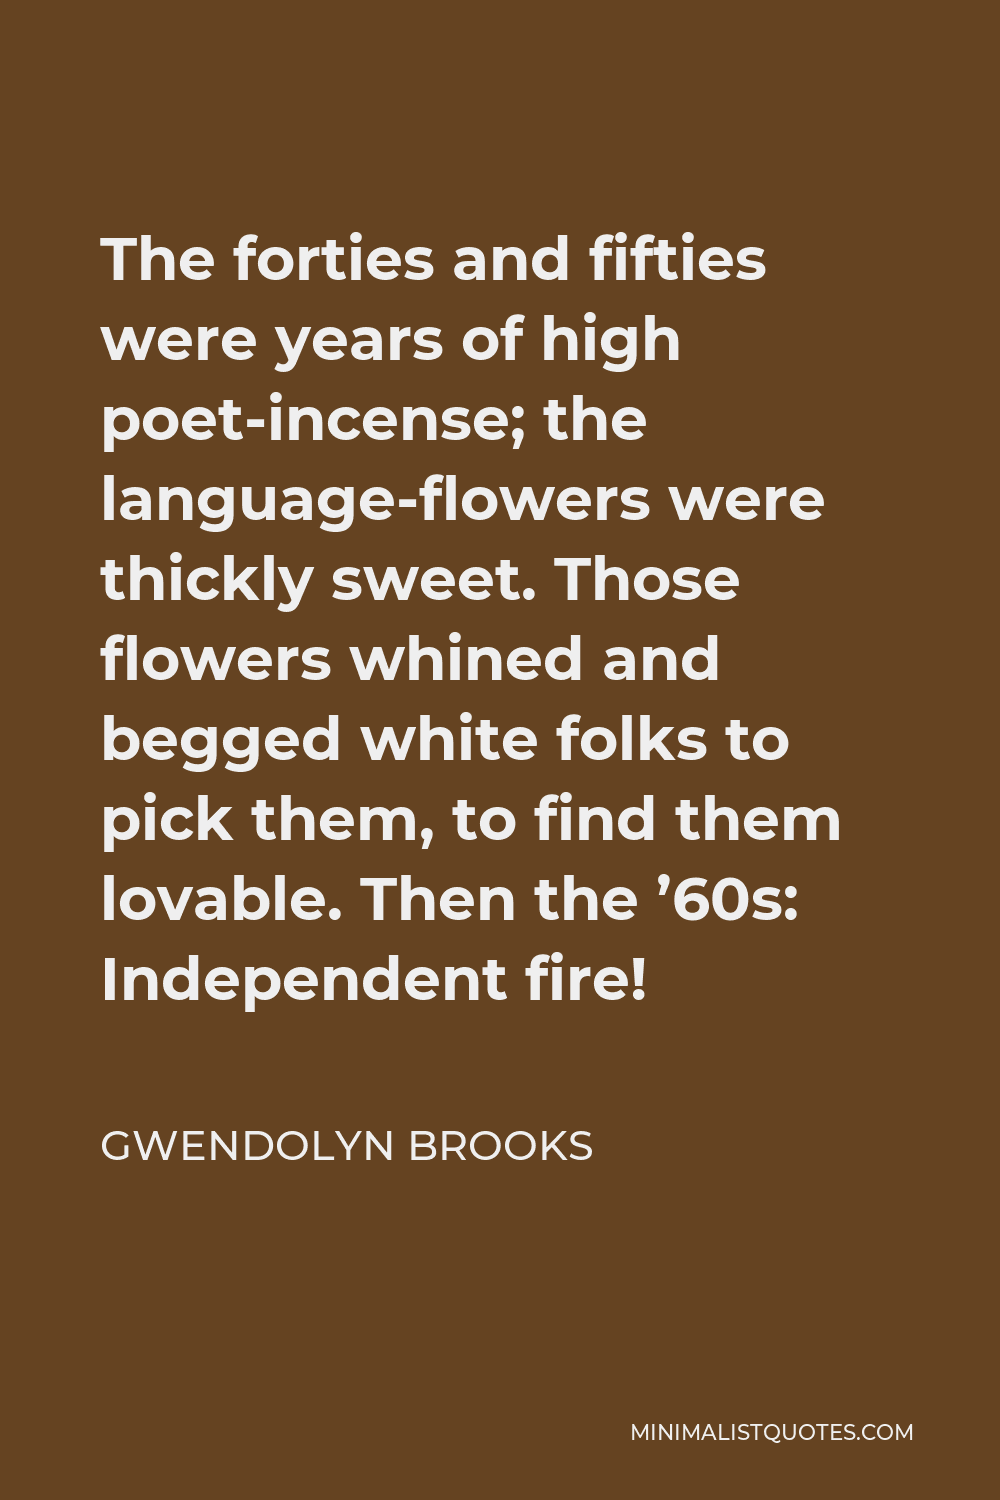 Gwendolyn Brooks Quote - The forties and fifties were years of high poet-incense; the language-flowers were thickly sweet. Those flowers whined and begged white folks to pick them, to find them lovable. Then the ’60s: Independent fire!